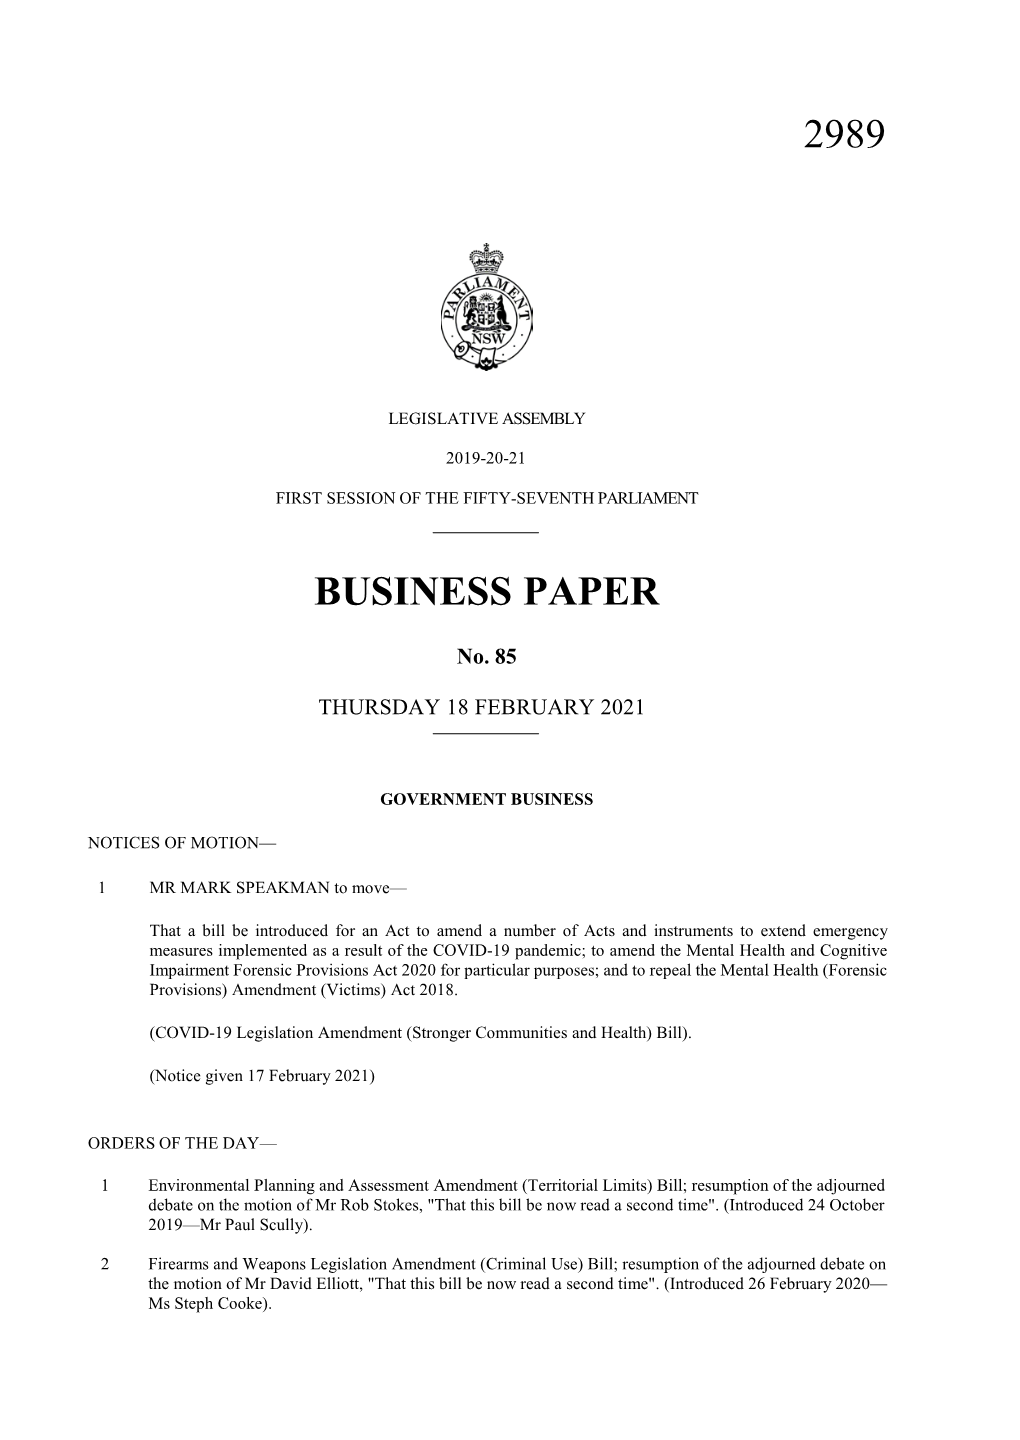 2989 Business Paper